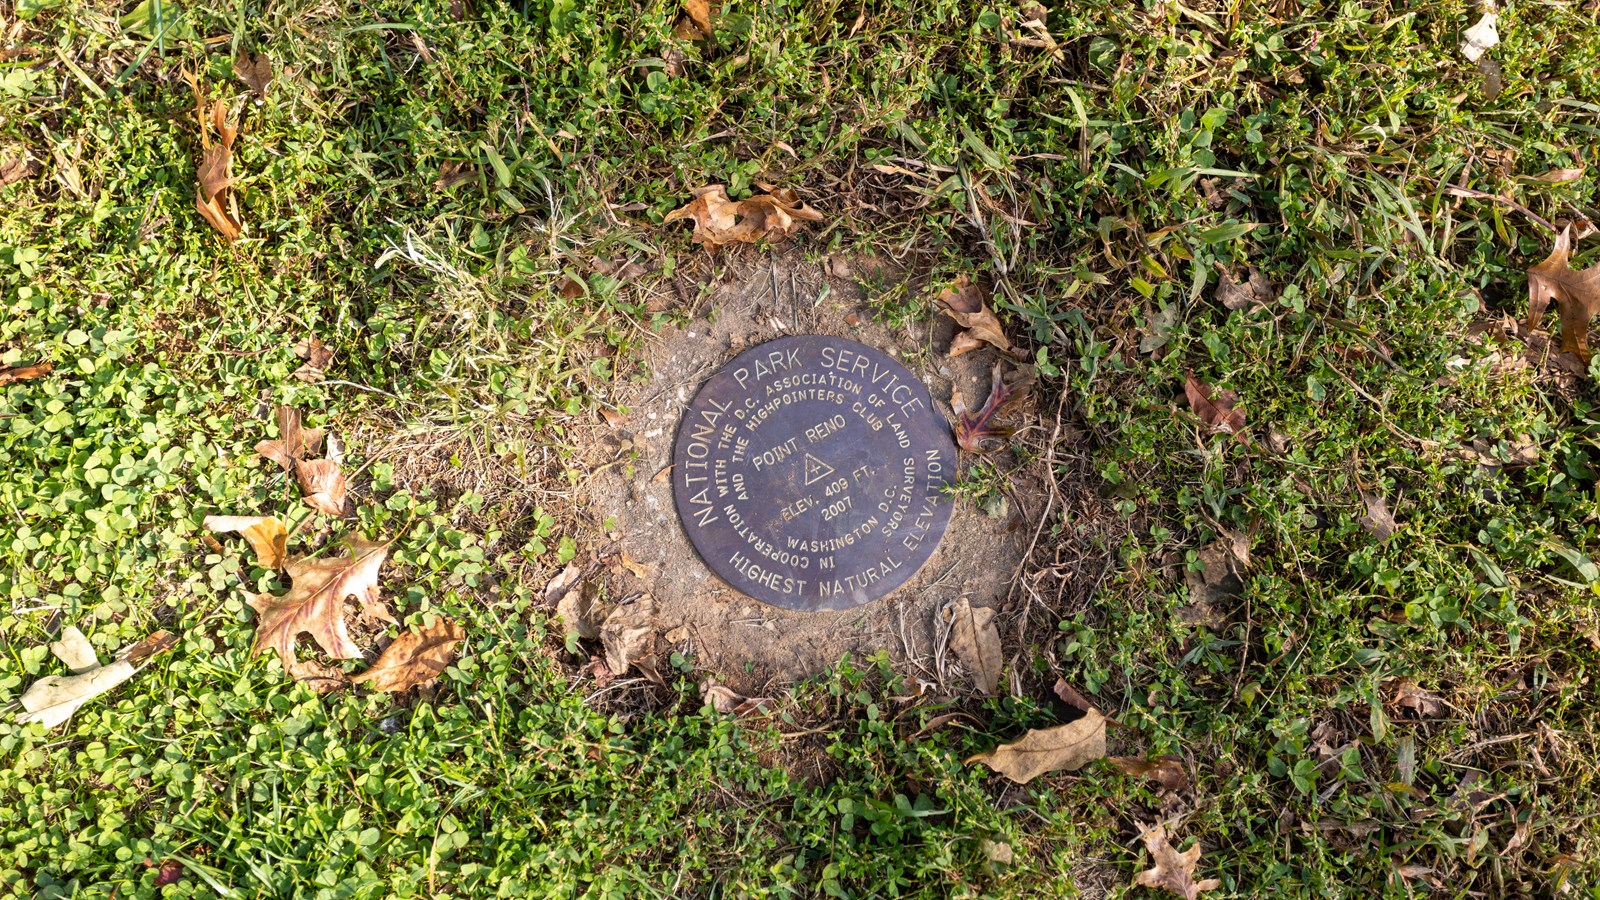 A circular plaque on the ground.